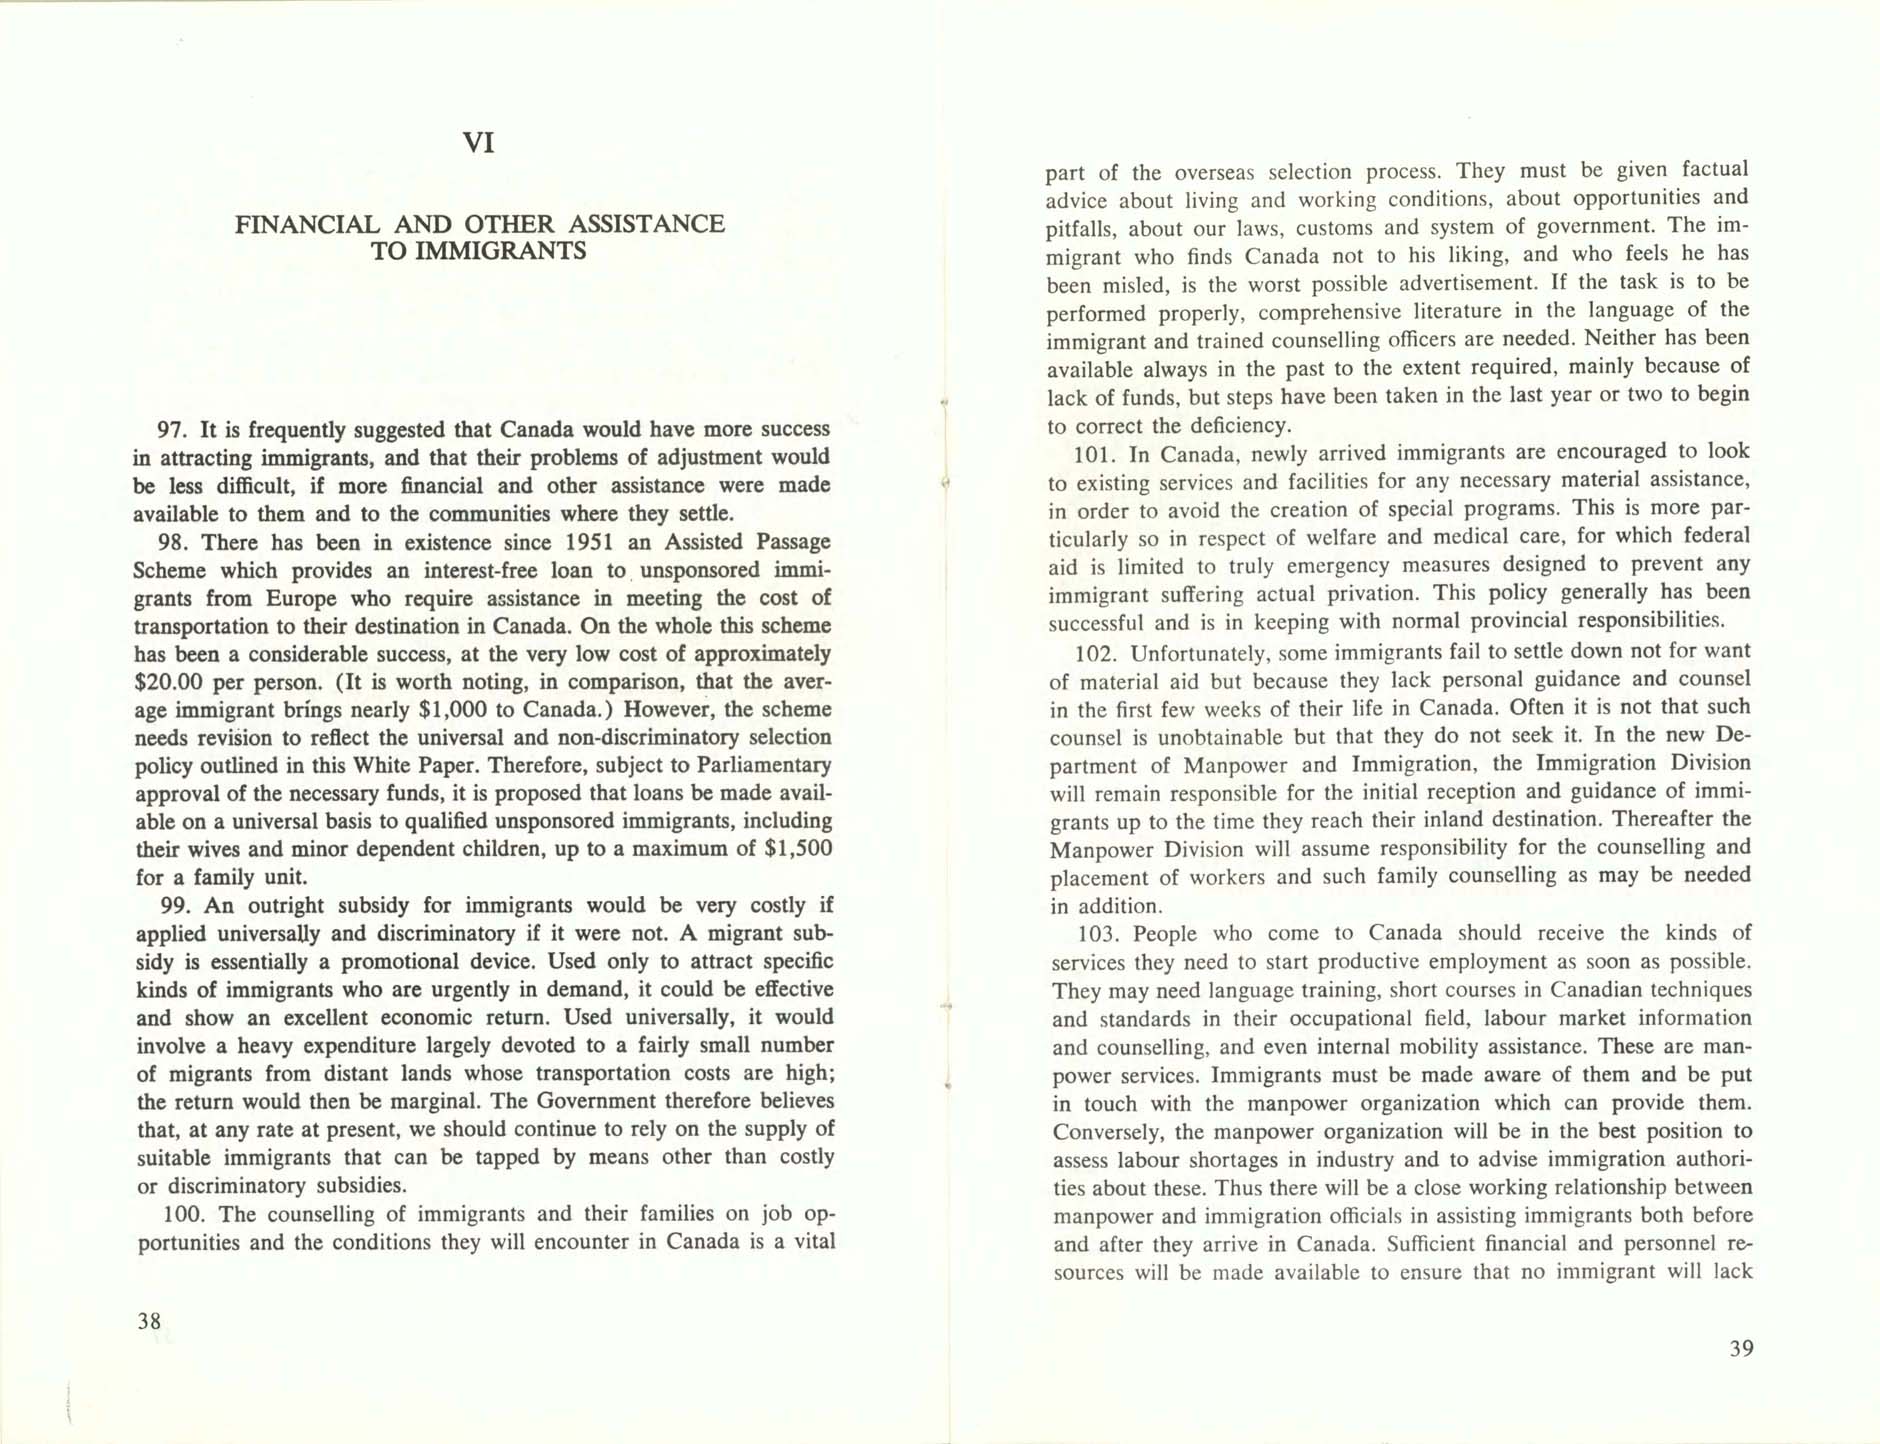 Page 38, 39 White Paper on Immigration, 1966